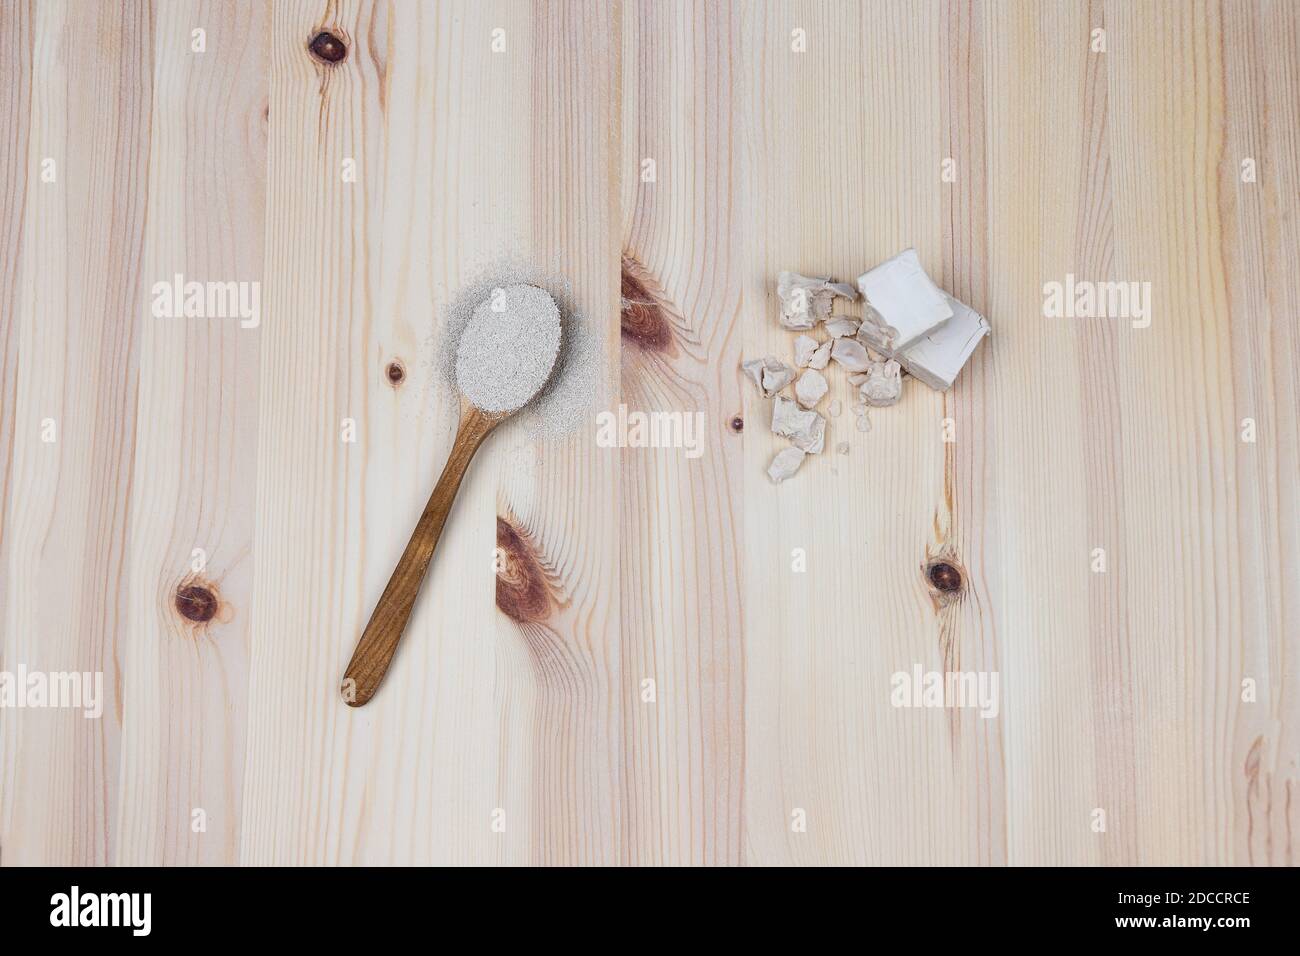 Two different types of yeast on wooden background. Dry yeast in a wooden spoon and fresh bakers yeast in cubes and broken pieces. Baking and making br Stock Photo